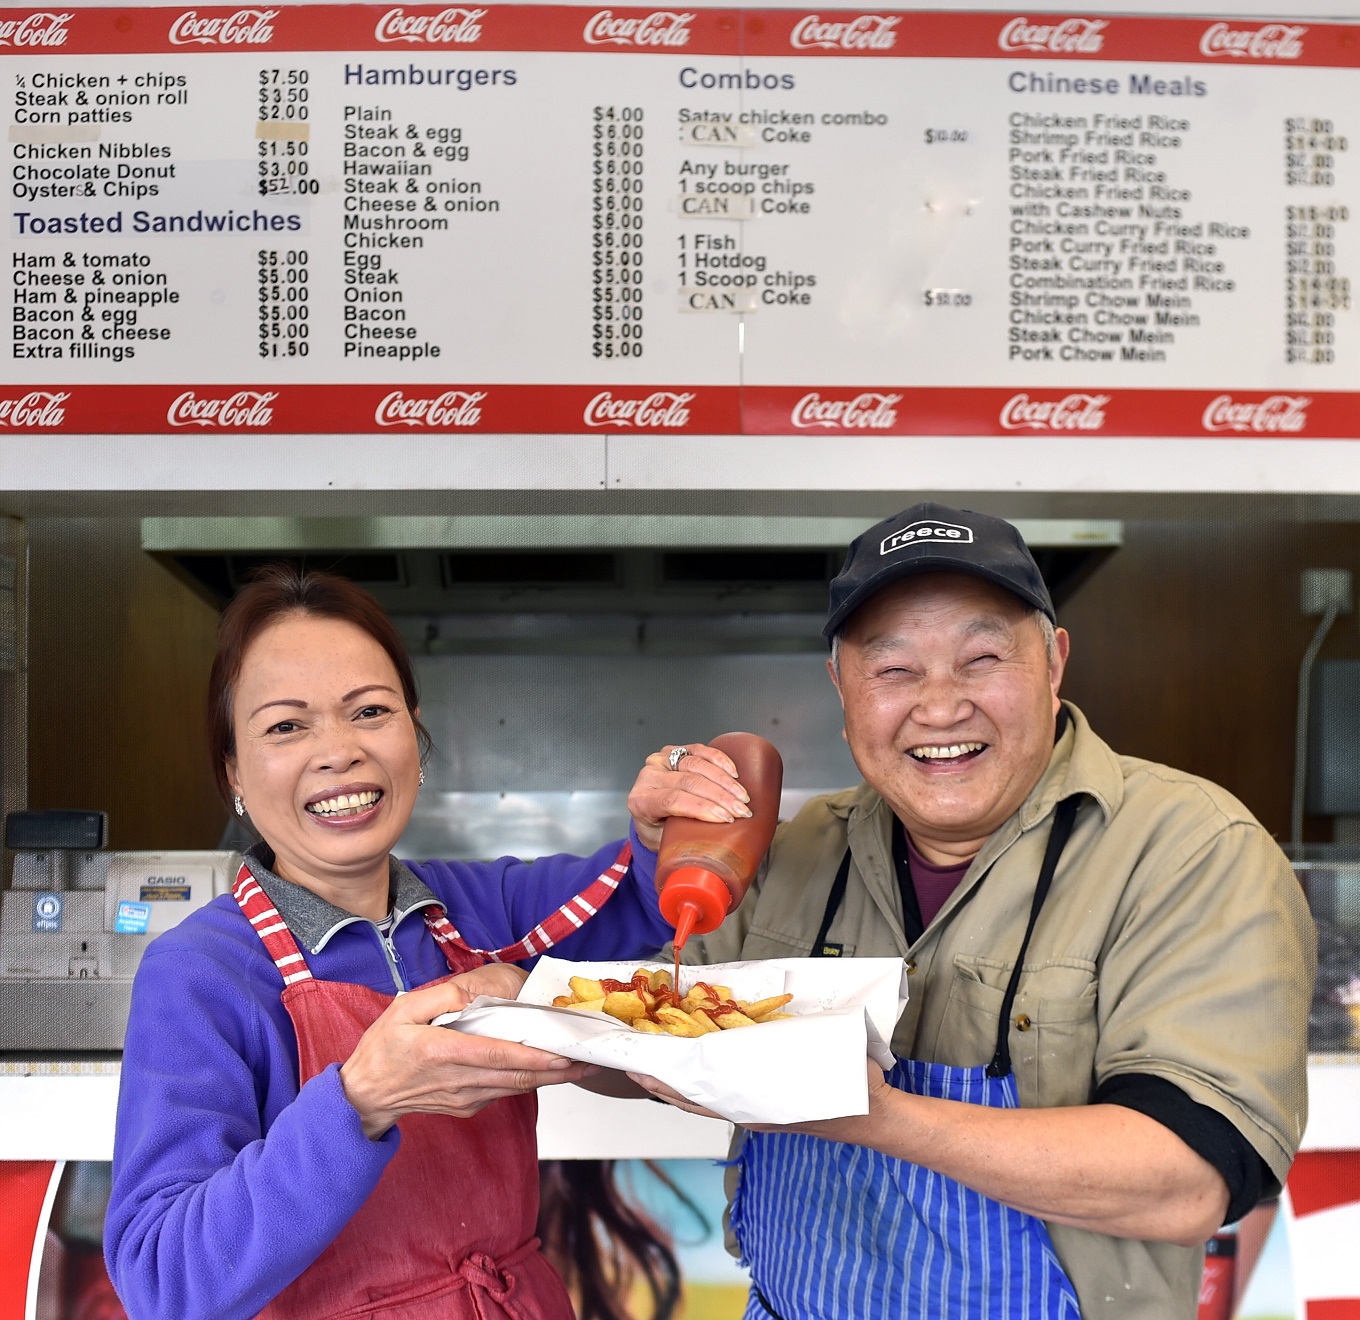 After 43 years, Sopheap, 58, and Nee, 61, Ung have sold their Pacific Fish Shop and are taking...